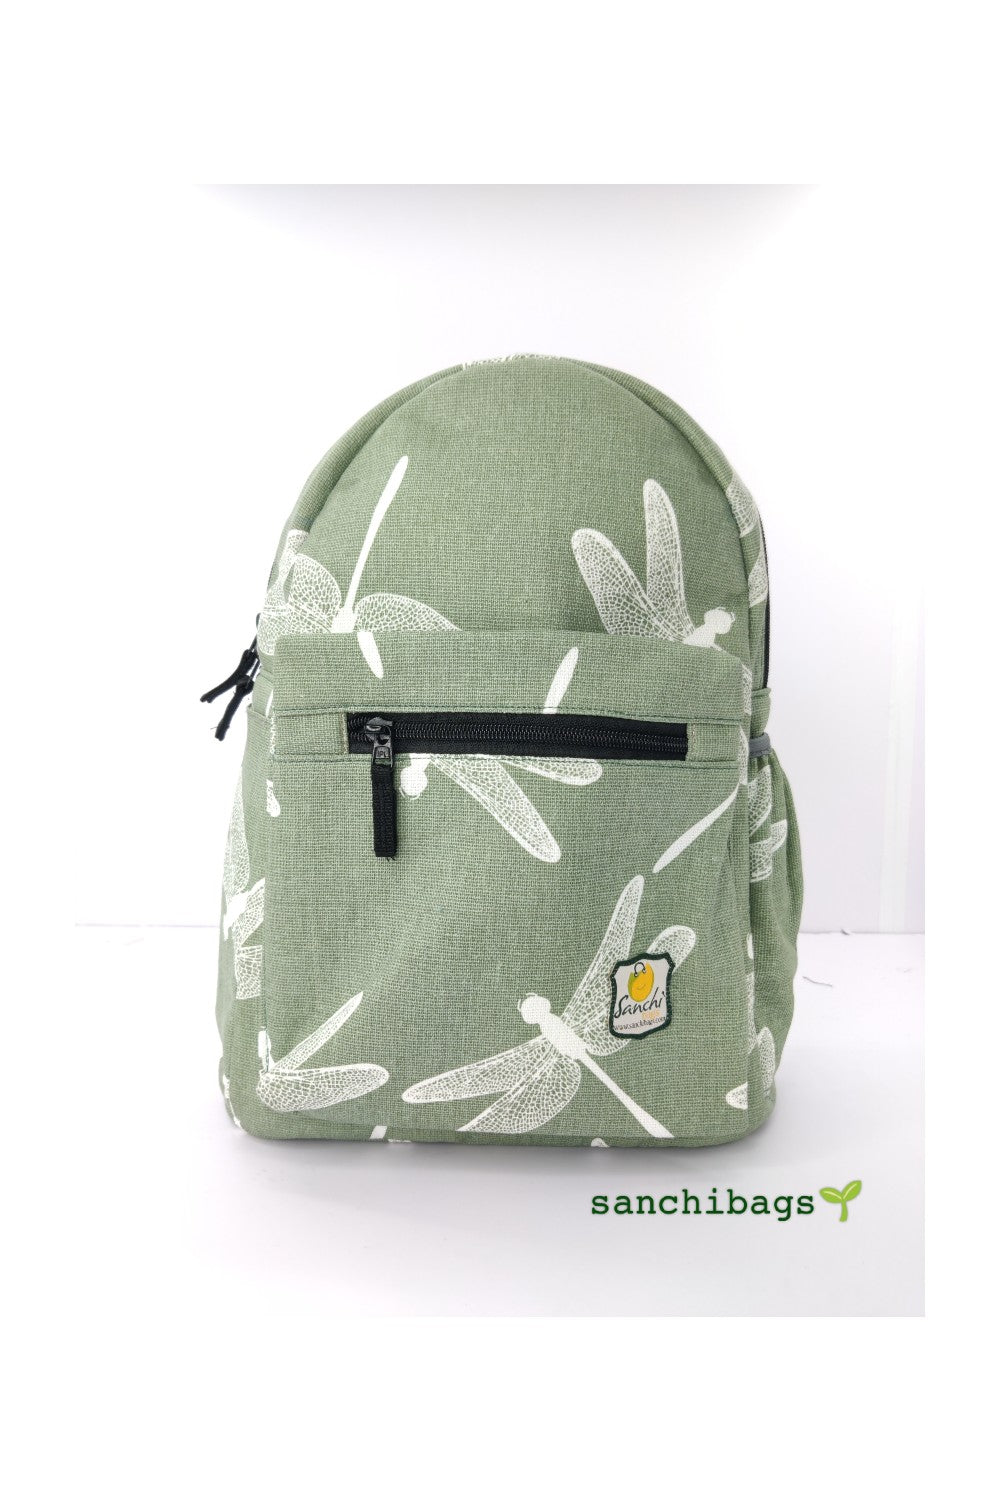 Buy SANCHI Bags ECO - Friendly Cotton Khaki and Military Colour School Bag  with Laptop Compartment at Amazon.in